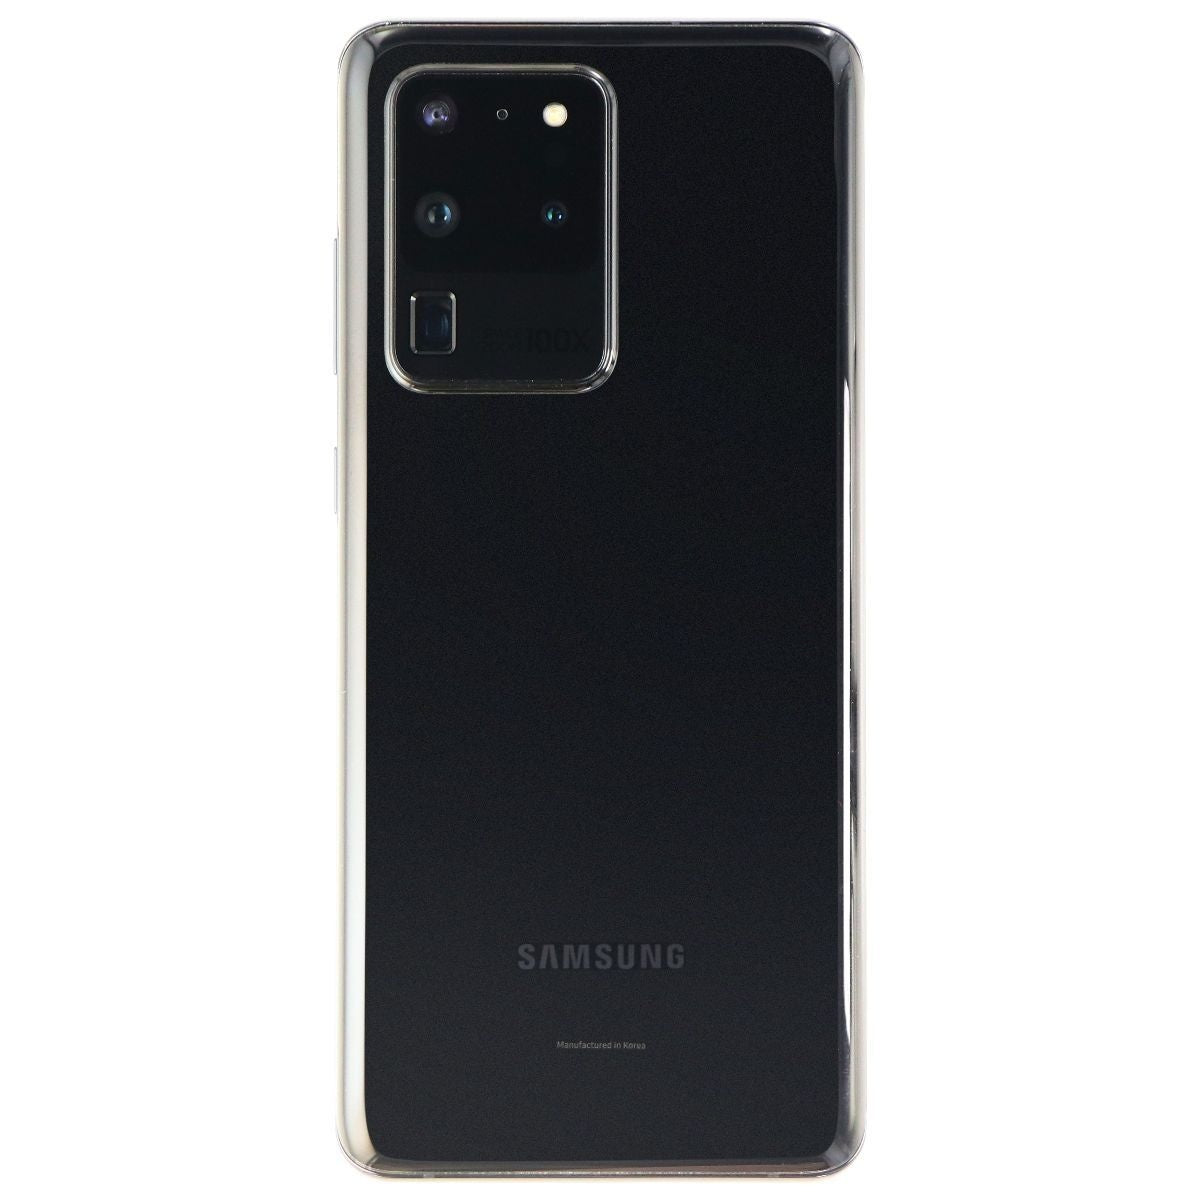 Samsung Galaxy S20 Ultra 5G (6.9-in) (SM-G988U) Verizon Only - 128GB/Black Cell Phones & Smartphones Samsung    - Simple Cell Bulk Wholesale Pricing - USA Seller